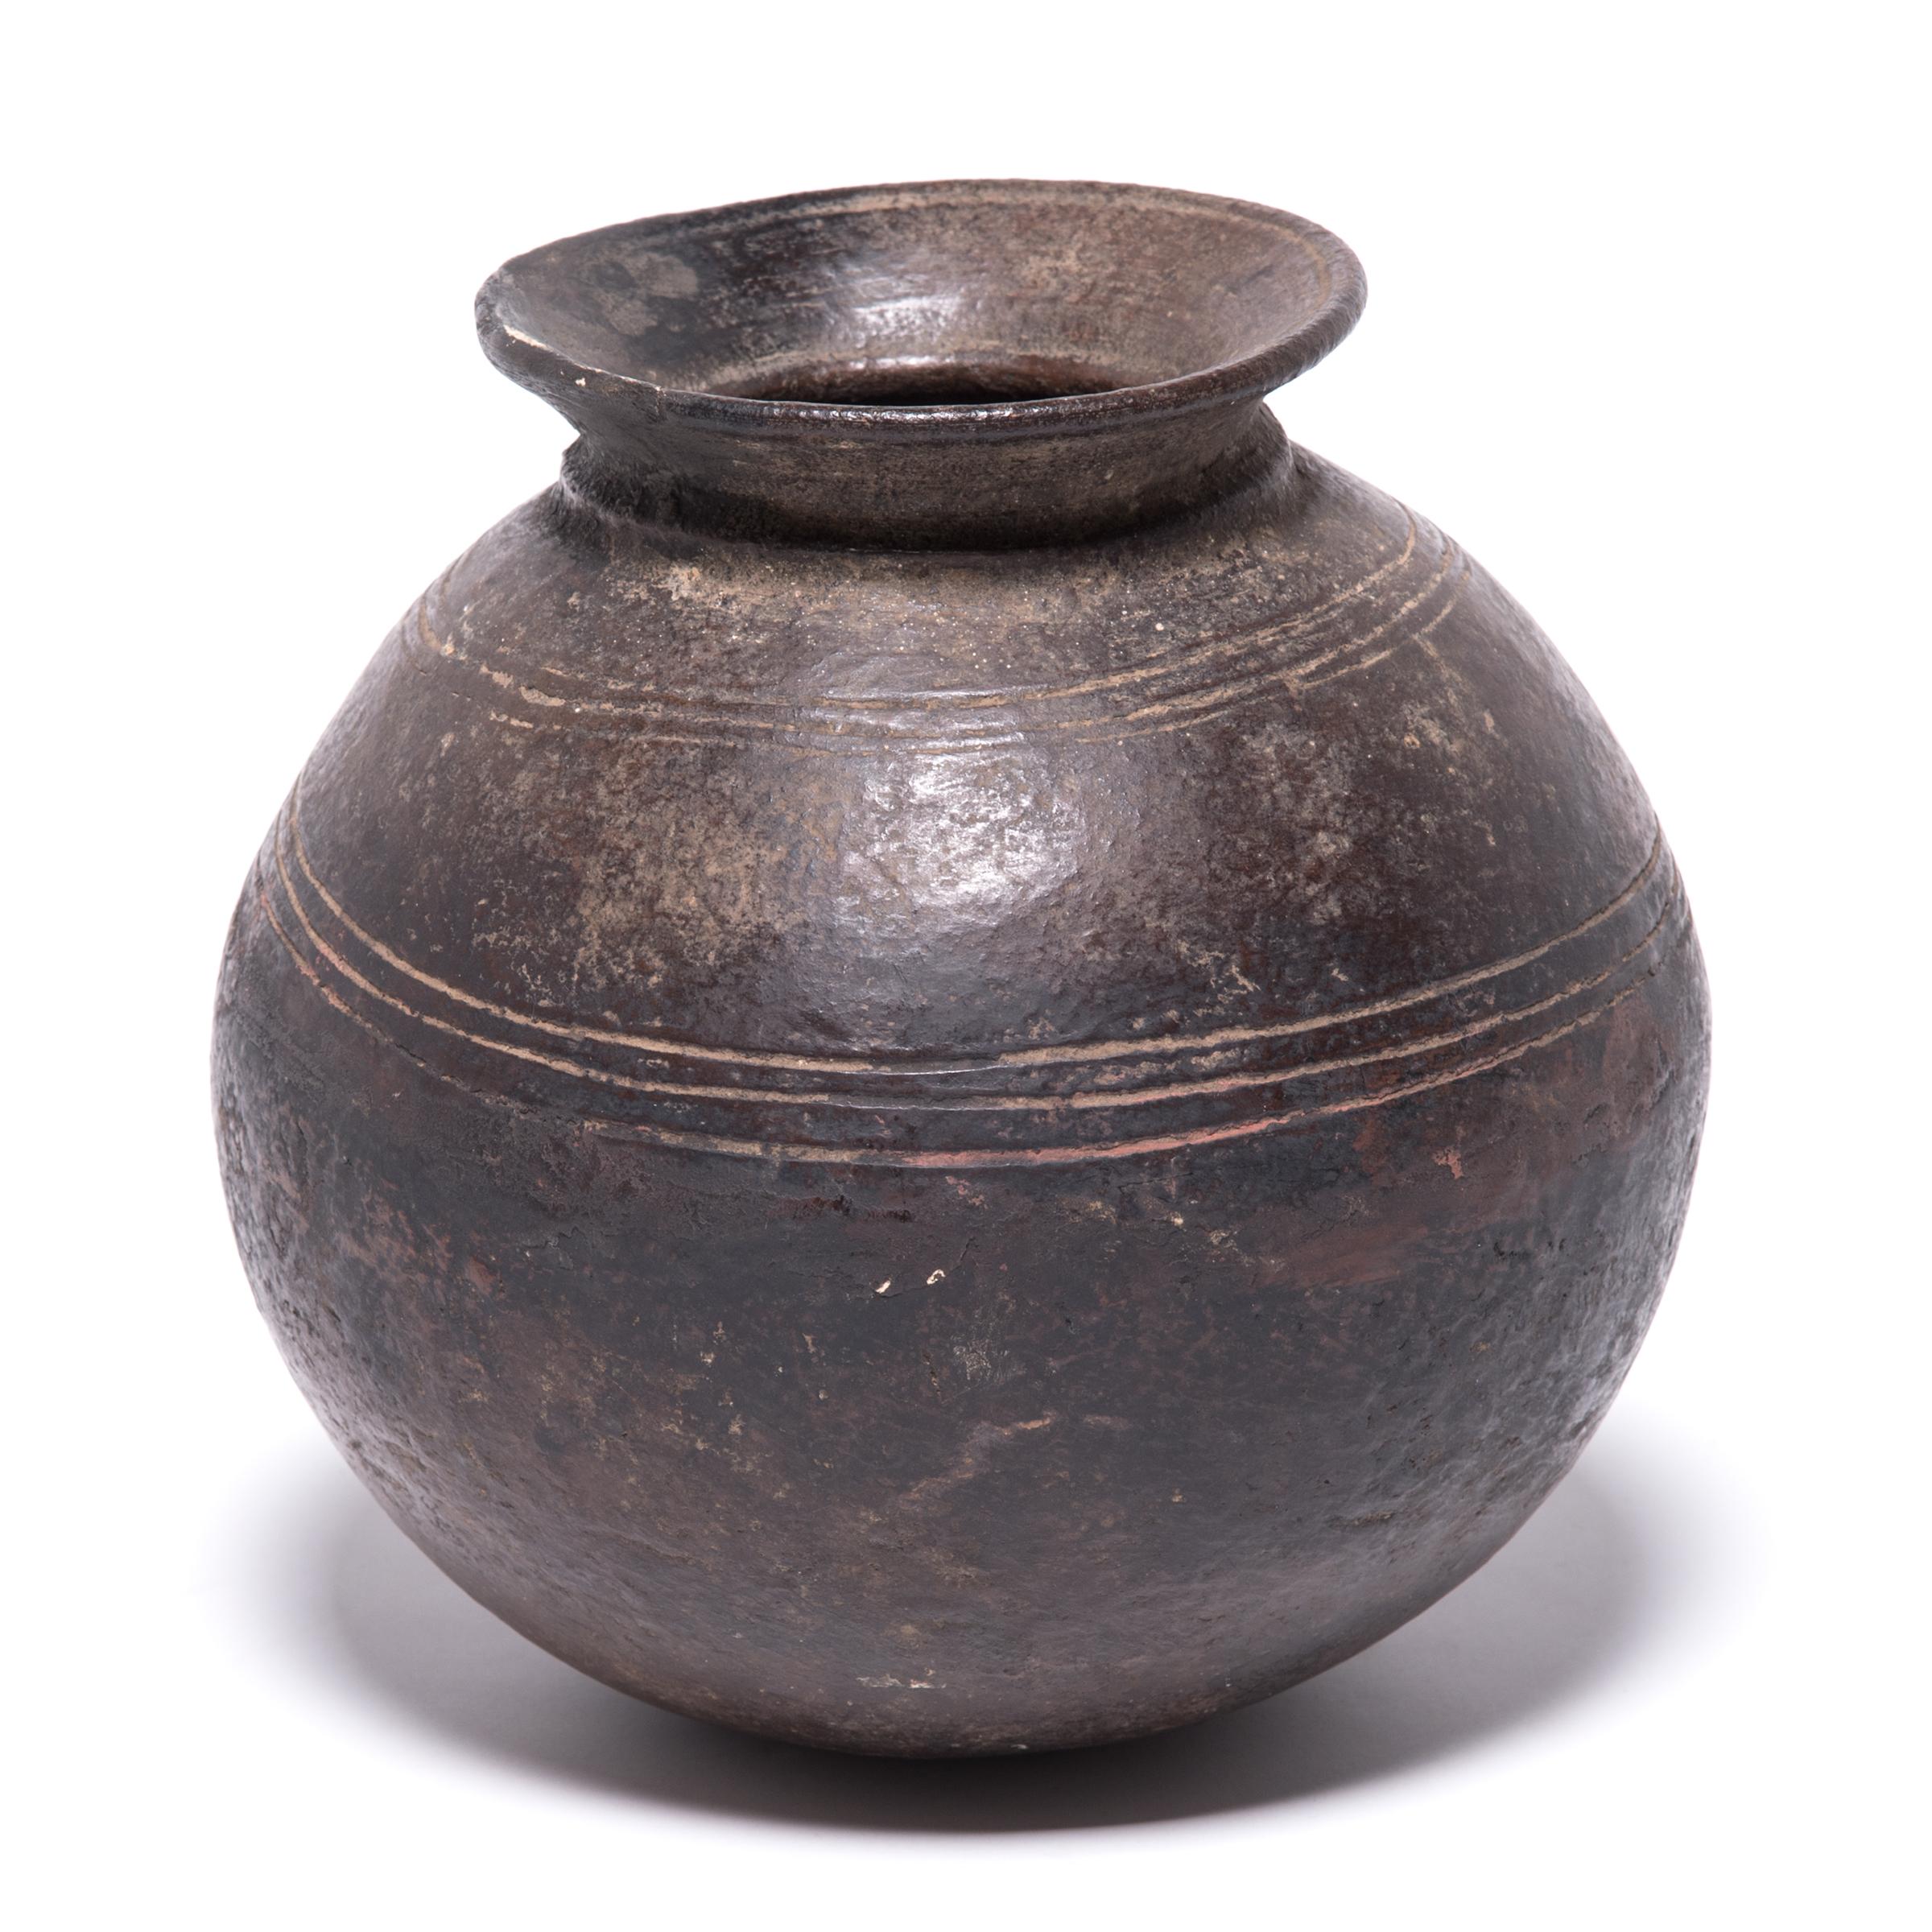 The Nupe people of Nigeria were touted as some of the finest ceramicists in Africa. Everyday objects, like this water vessel, received detailed attention. The vessel's varied textures come from its functional design. The dimples and bands were